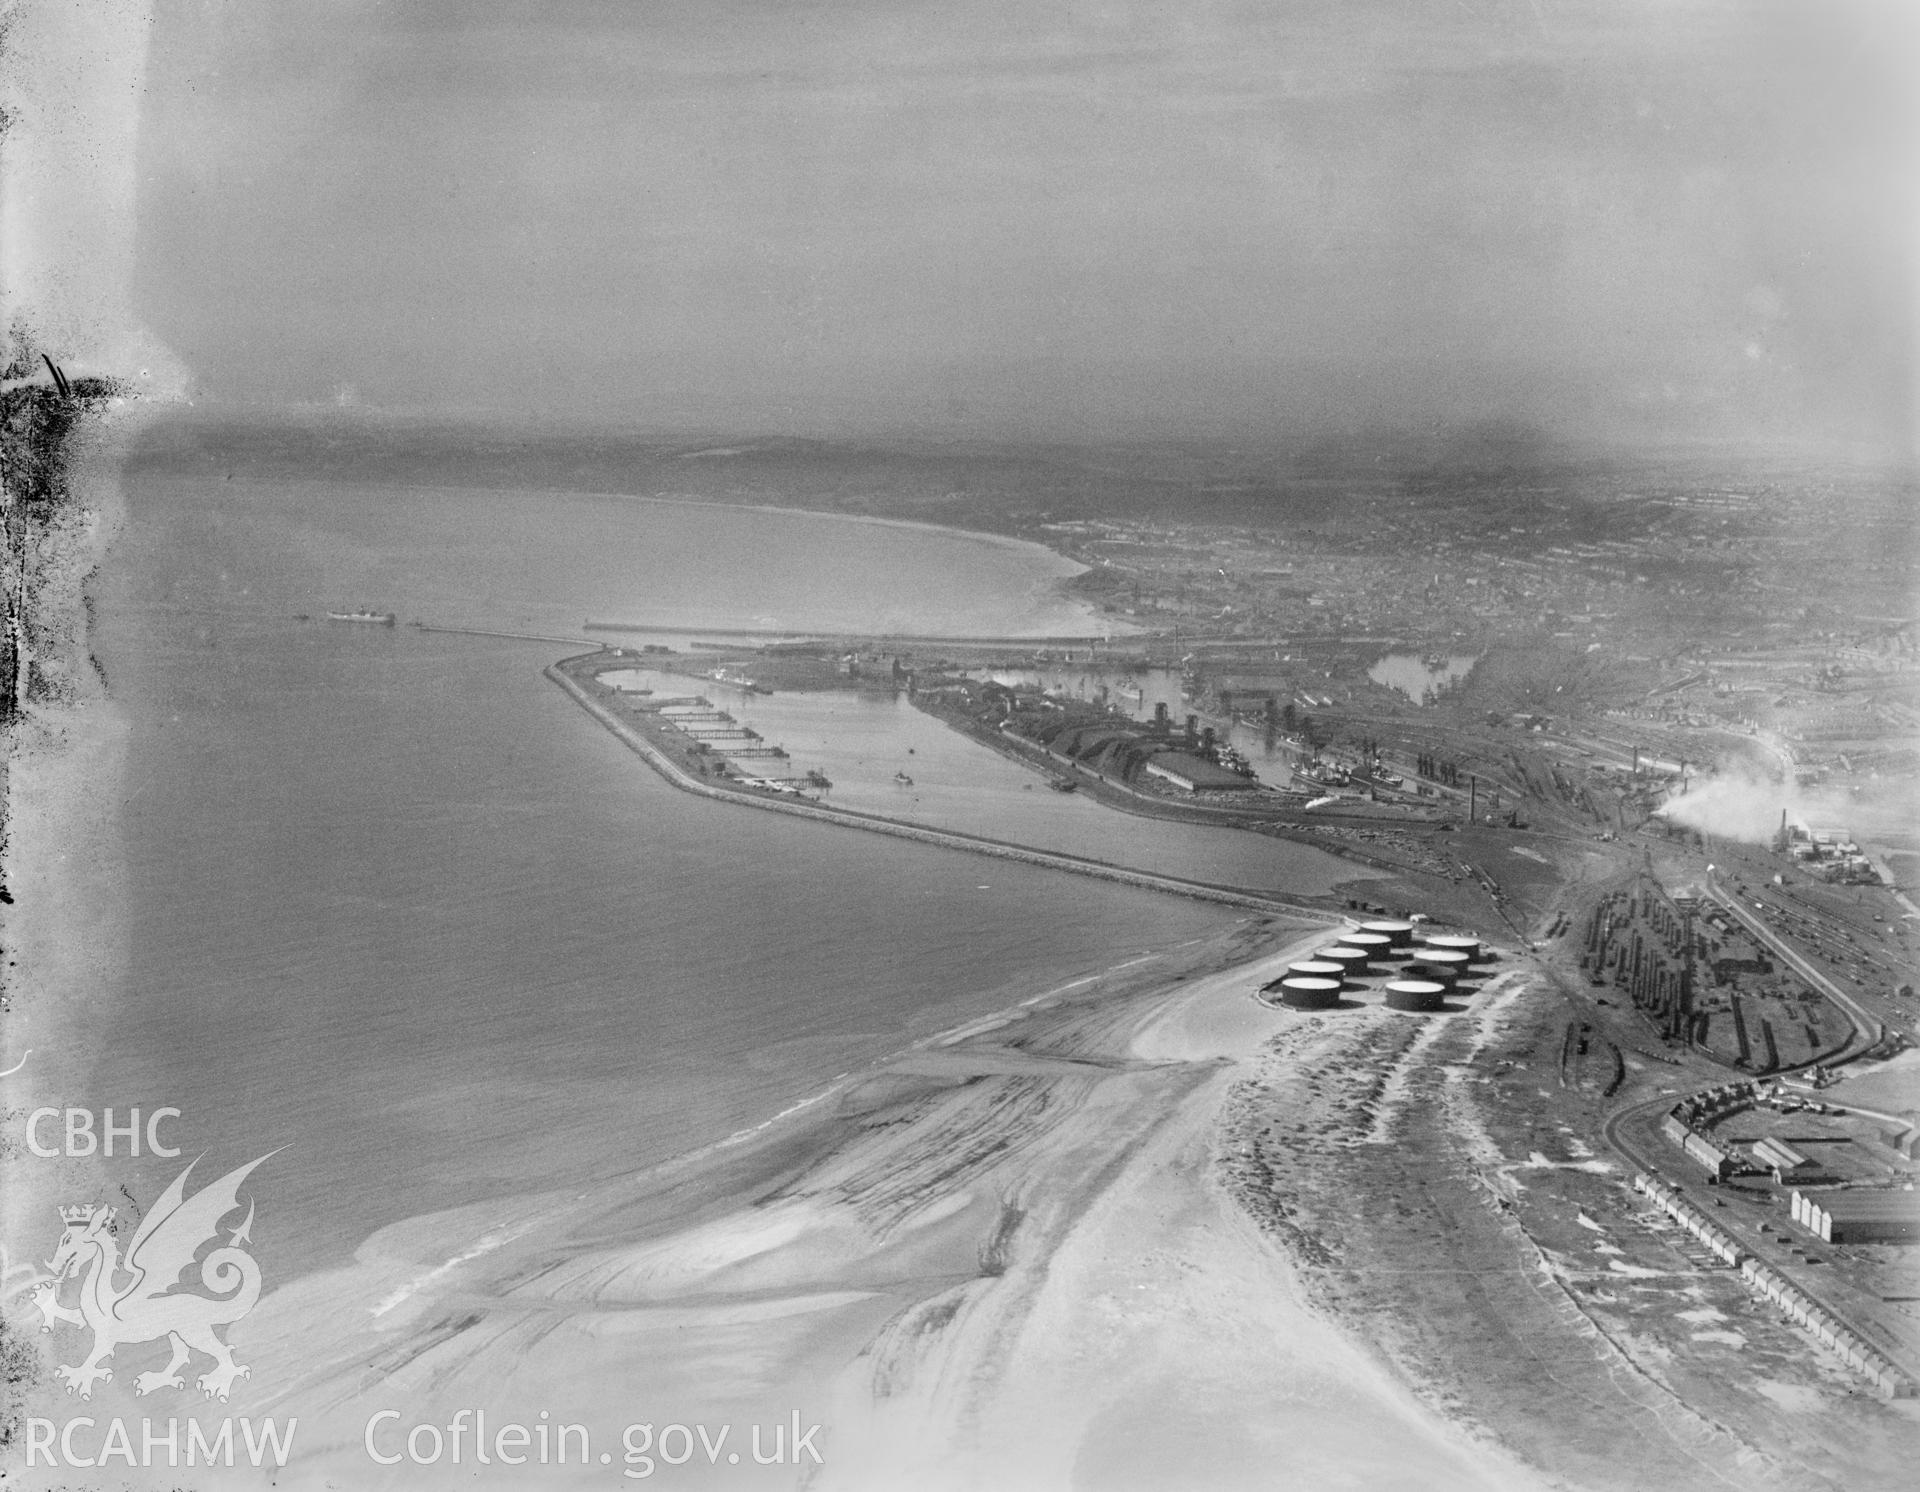 Distant view of Swansea, oblique aerial view. 5?x4? black and white glass plate negative.